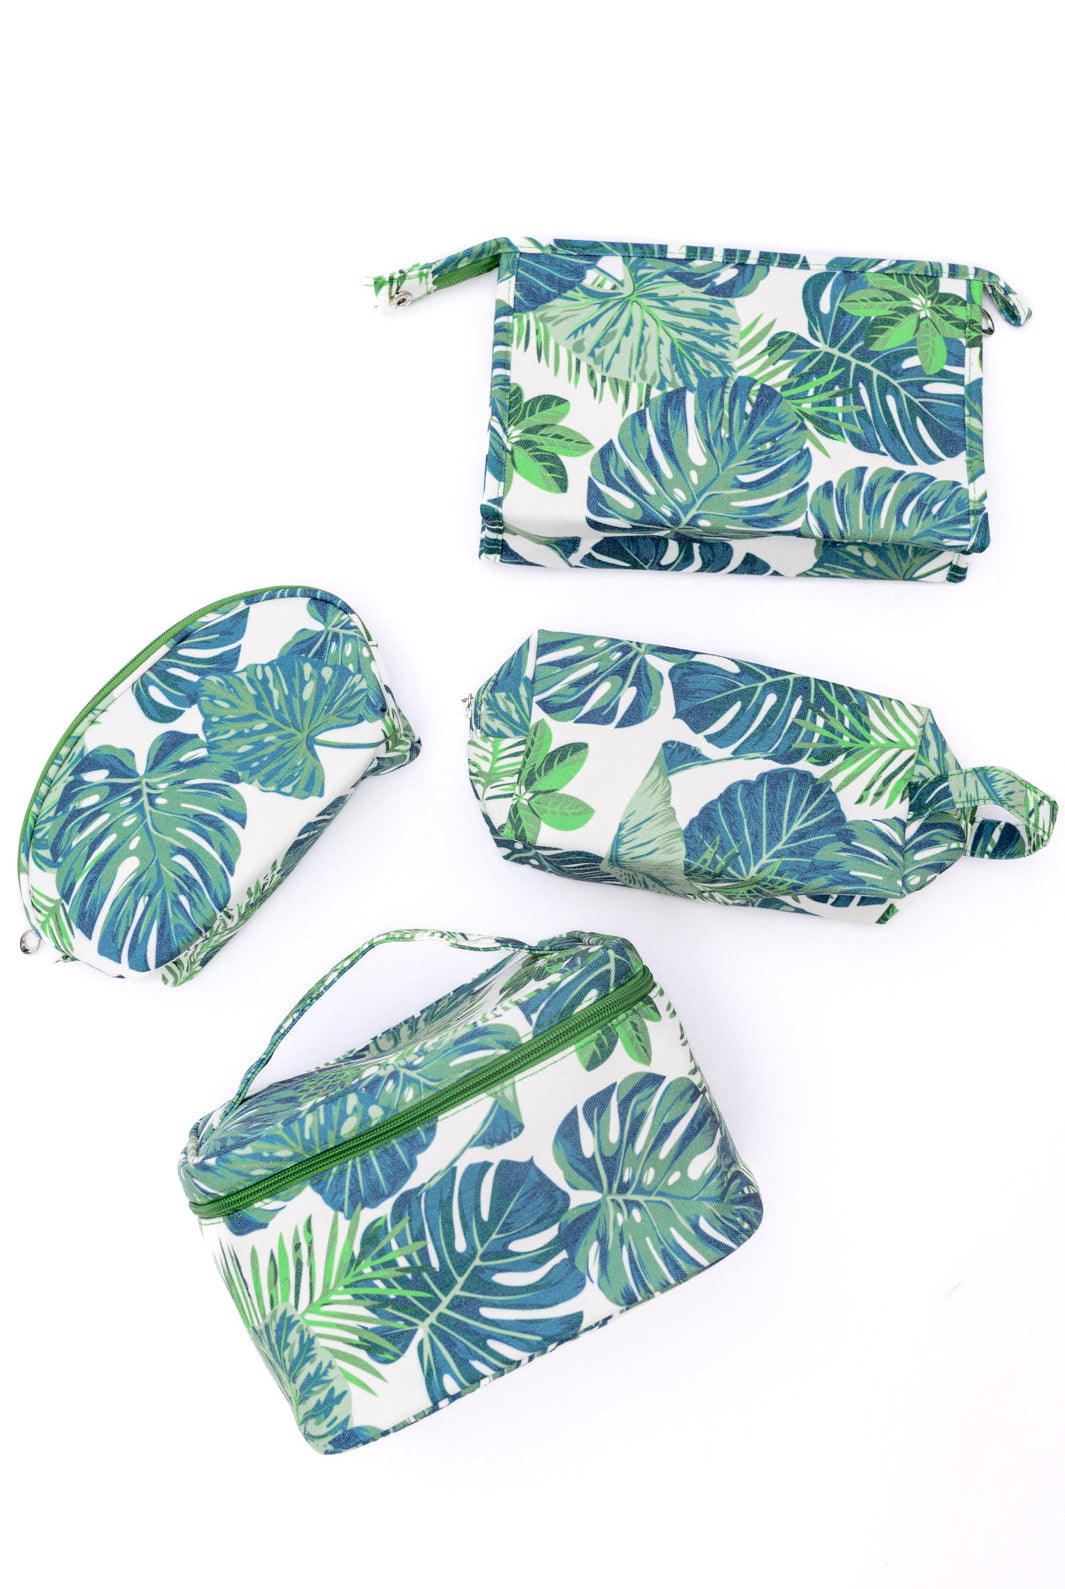 Plant Lover Cosmetic Bags Set of 4-Gifts-Krush Kandy, Women's Online Fashion Boutique Located in Phoenix, Arizona (Scottsdale Area)